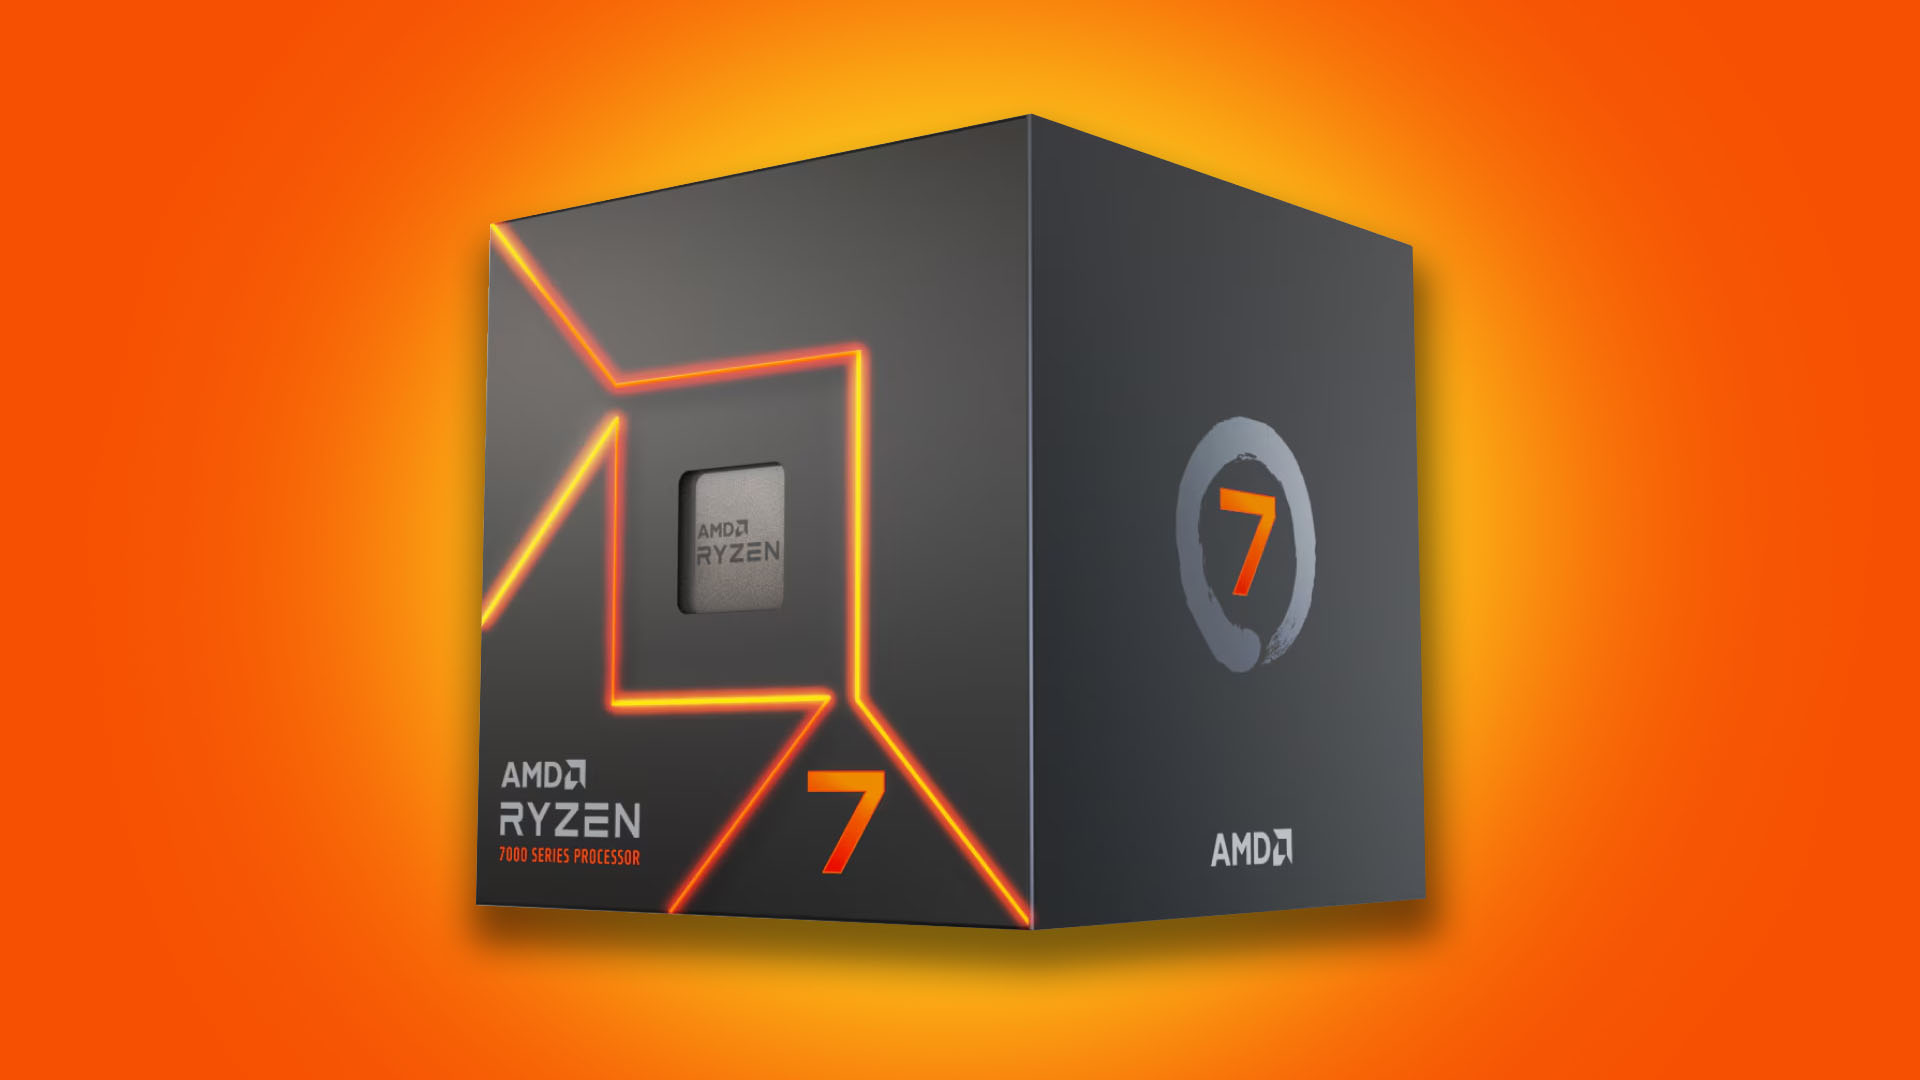 Grab the AMD Ryzen 7 7700 at its lowest ever price, if you're quick